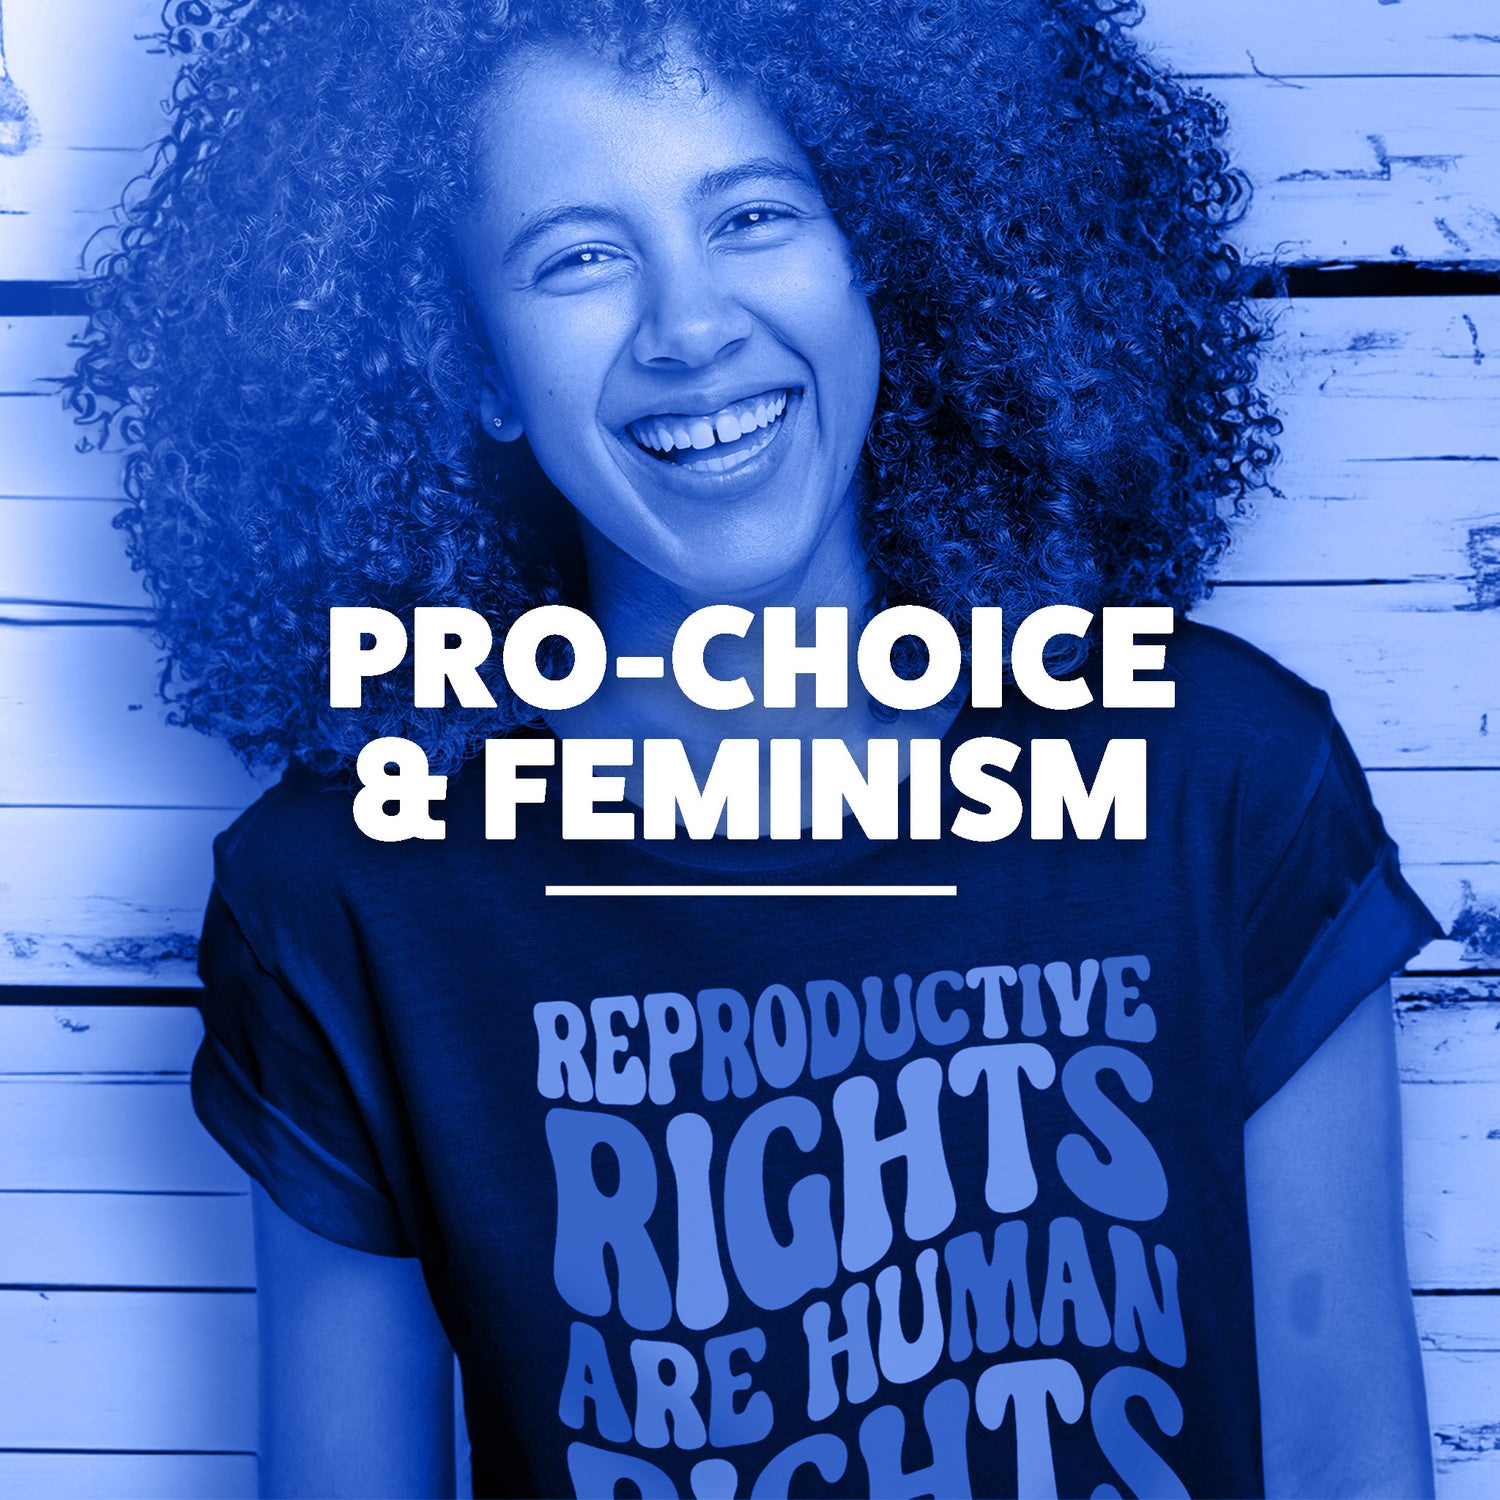 A woman of color wearing a t-shirt that says "Reproductive Rights Are Human RIghts" in a vintage design. This image is for our Pro-Choice & Feminism collection.